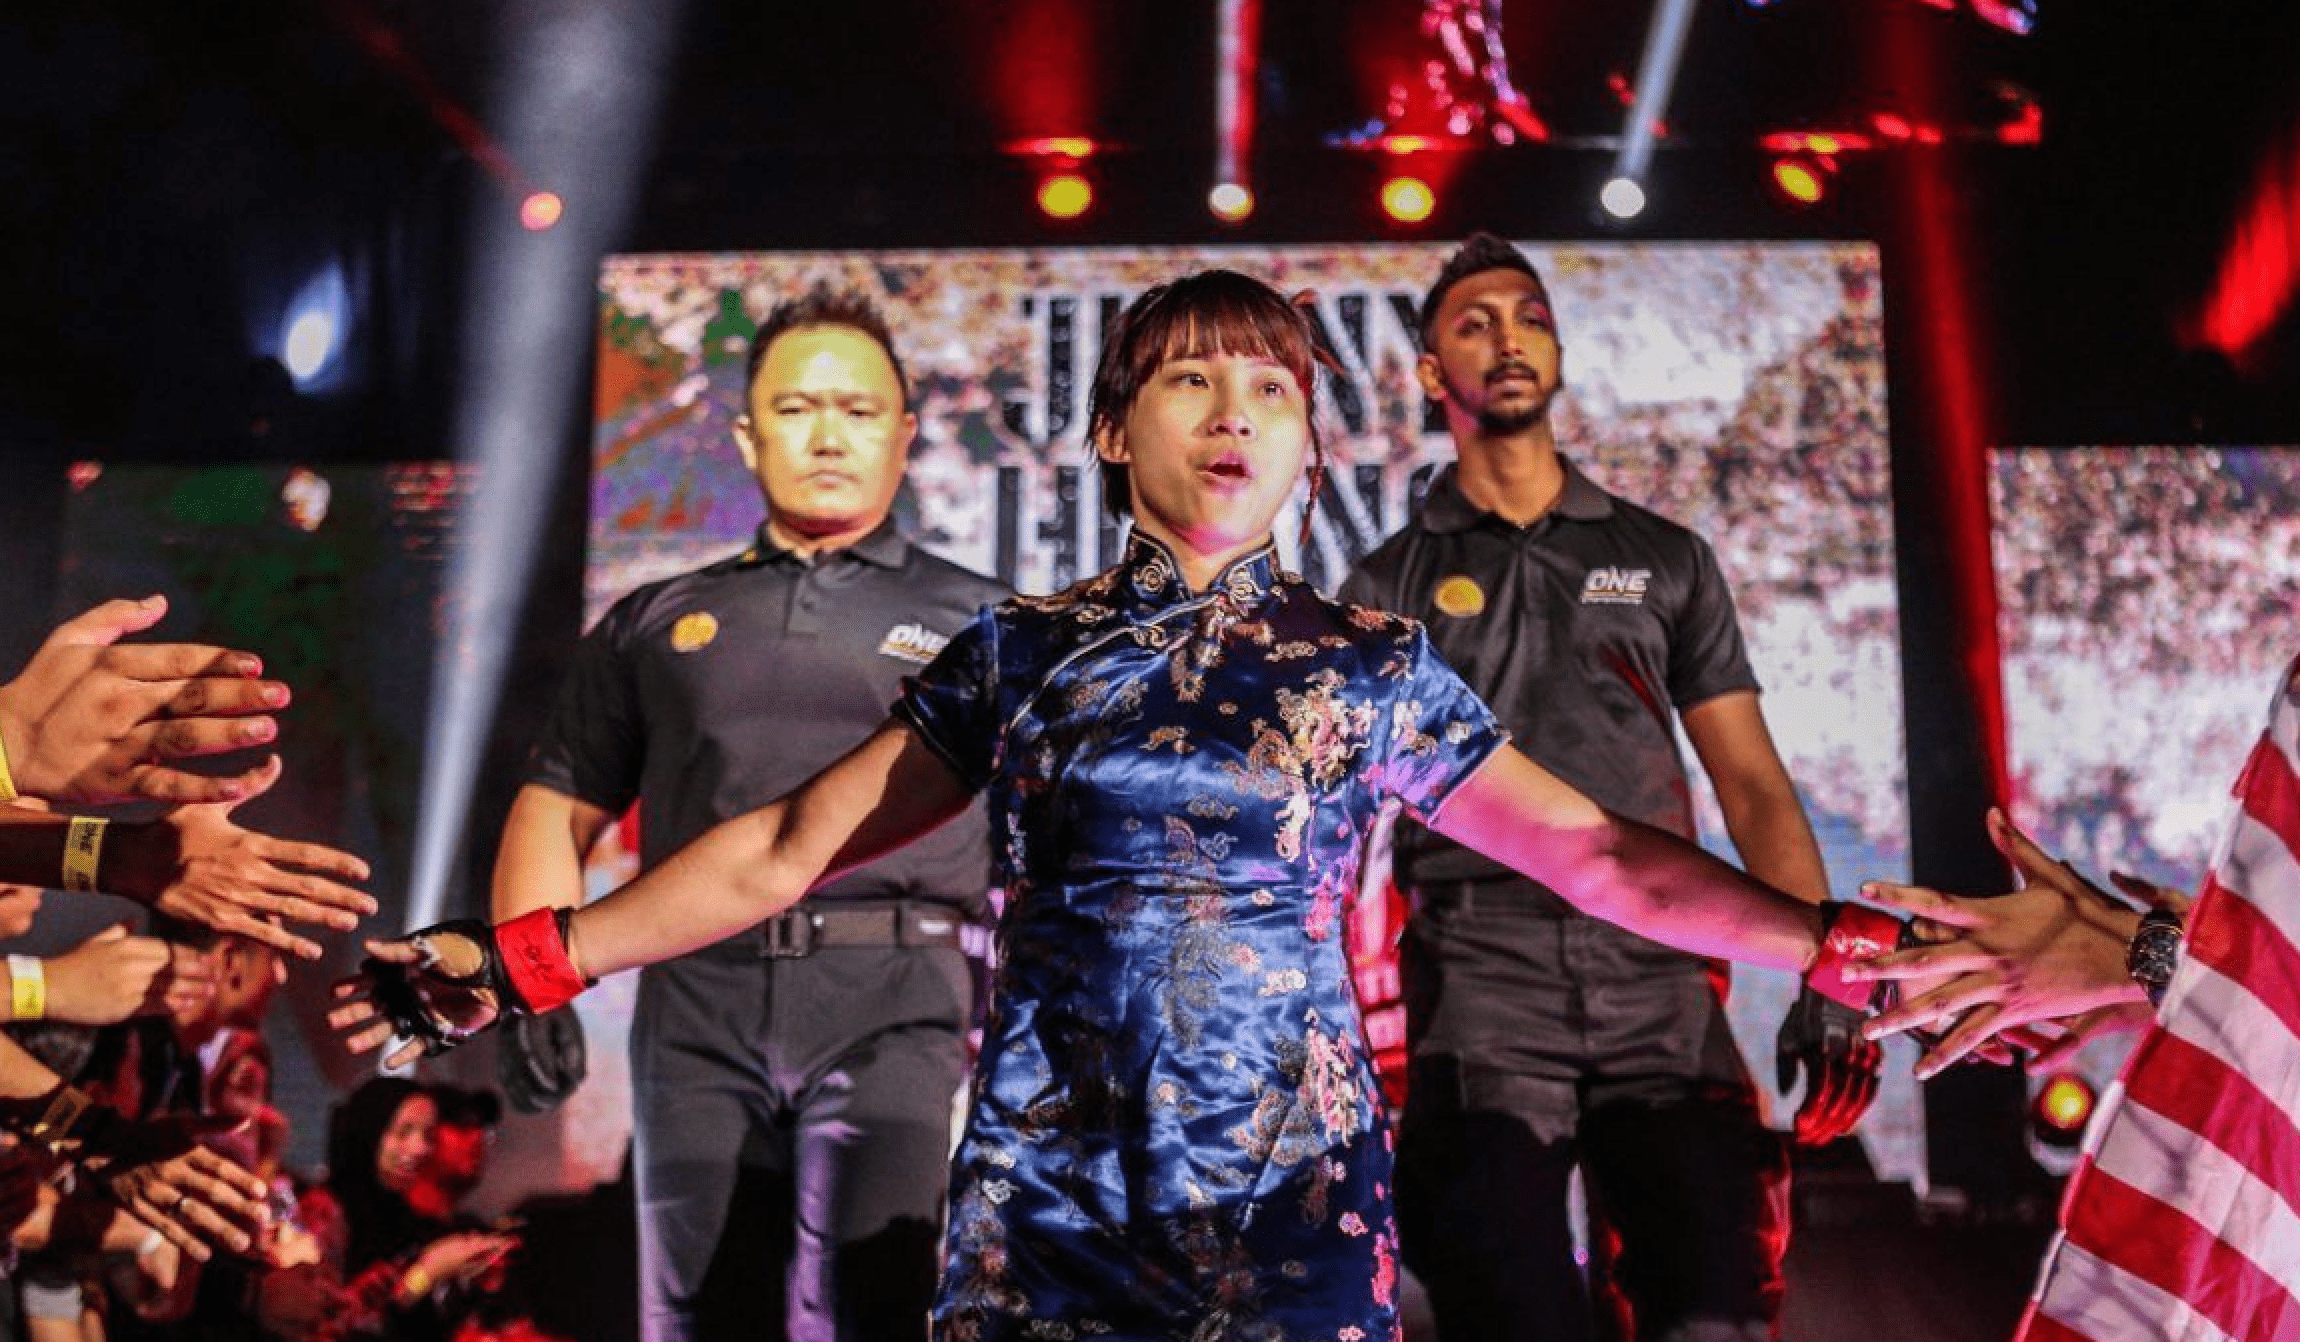 Jenny Huang Wants To Show The World She Has A New Fighting Style